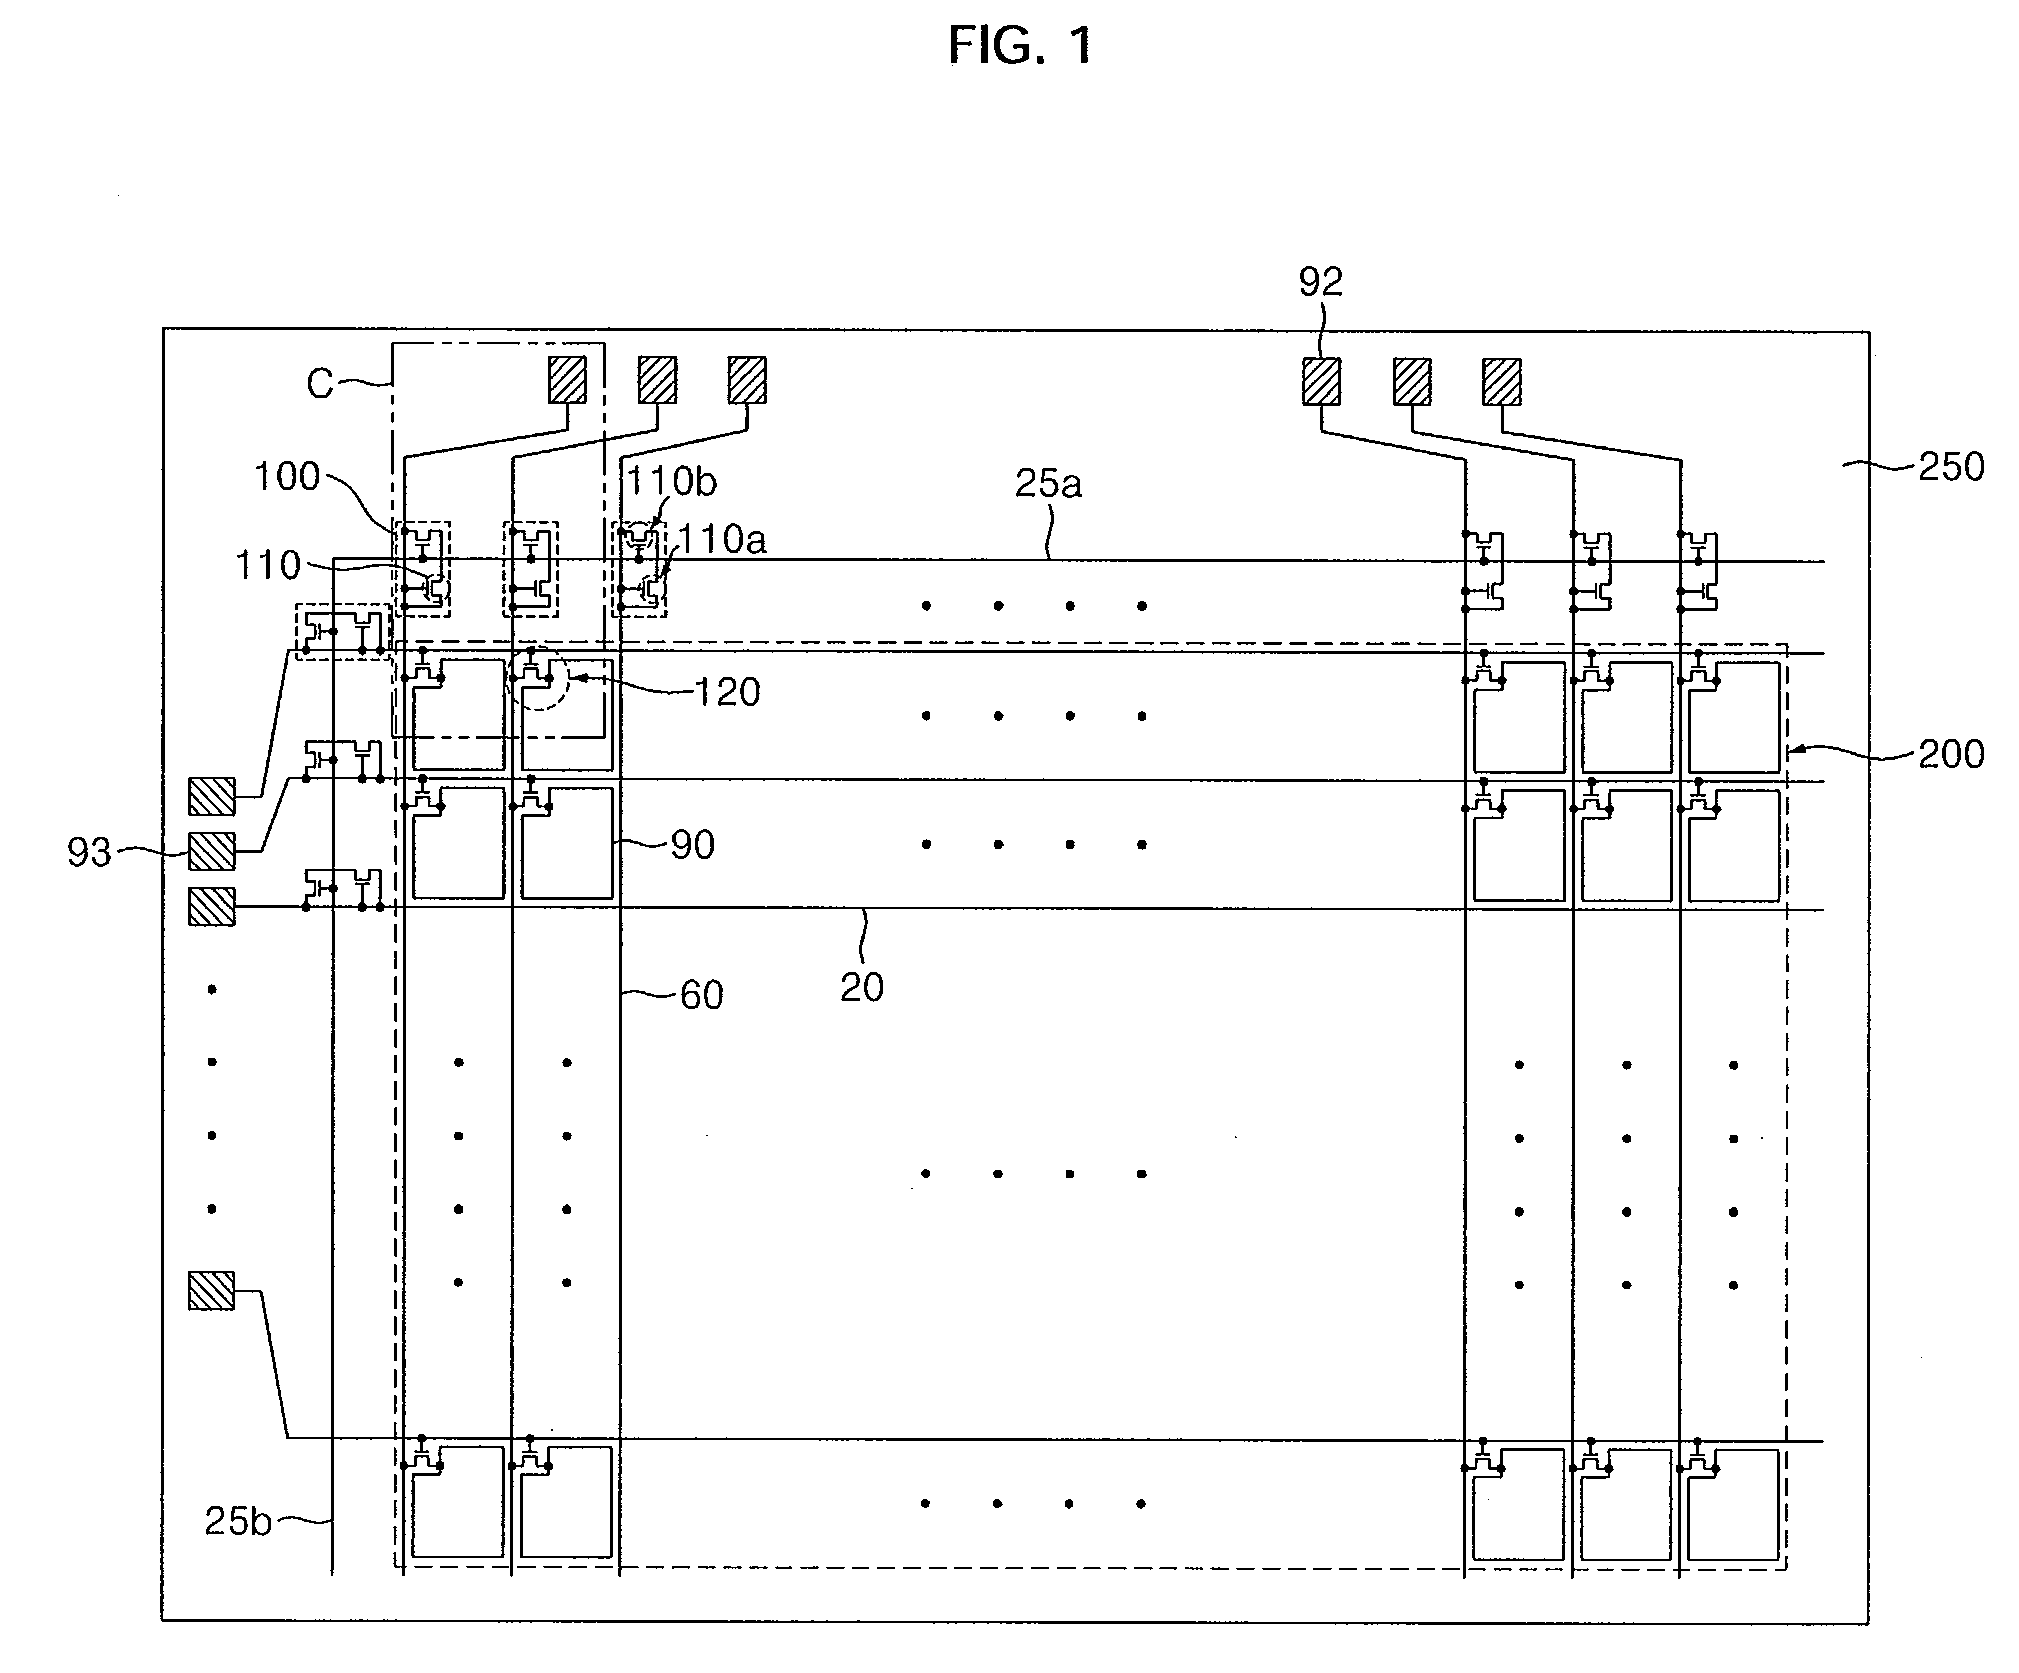 Thin film transistor substrate and method of manufacture